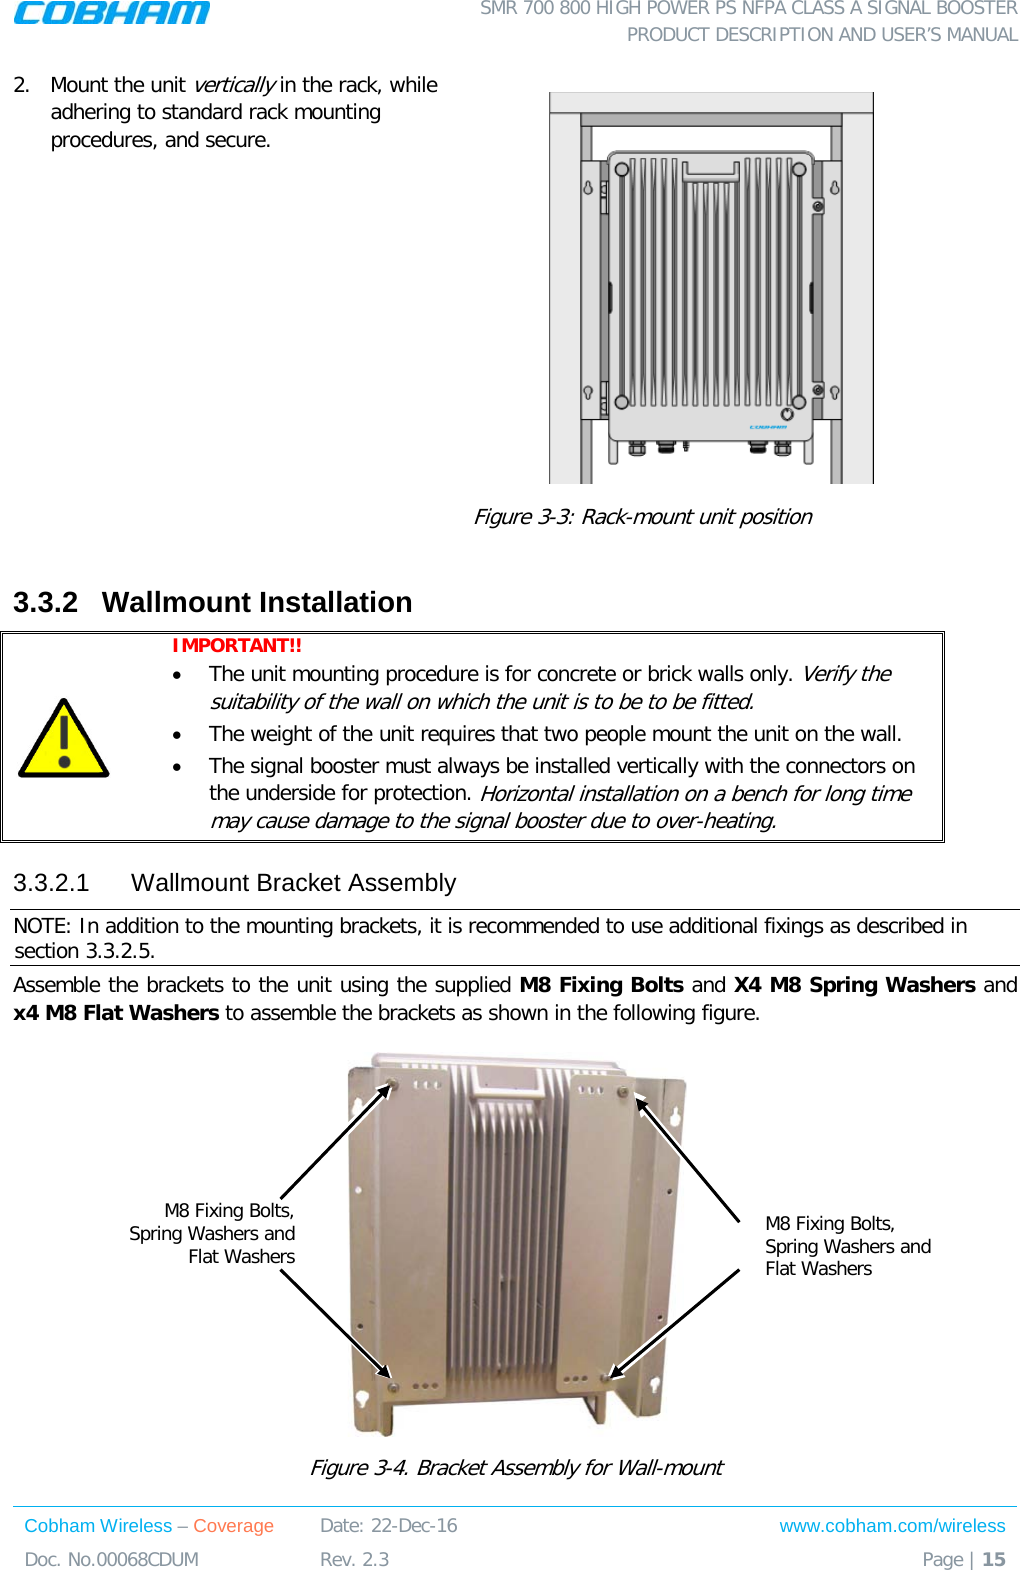  SMR 700 800 HIGH POWER PS NFPA CLASS A SIGNAL BOOSTER  PRODUCT DESCRIPTION AND USER’S MANUAL Cobham Wireless – Coverage Date: 22-Dec-16 www.cobham.com/wireless Doc. No.00068CDUM  Rev. 2.3  Page | 15  2.  Mount the unit vertically in the rack, while adhering to standard rack mounting procedures, and secure.  Figure  3-3: Rack-mount unit position 3.3.2  Wallmount Installation  IMPORTANT!!  • The unit mounting procedure is for concrete or brick walls only. Verify the suitability of the wall on which the unit is to be to be fitted.  • The weight of the unit requires that two people mount the unit on the wall. • The signal booster must always be installed vertically with the connectors on the underside for protection. Horizontal installation on a bench for long time may cause damage to the signal booster due to over-heating. 3.3.2.1  Wallmount Bracket Assembly NOTE: In addition to the mounting brackets, it is recommended to use additional fixings as described in section  3.3.2.5.  Assemble the brackets to the unit using the supplied M8 Fixing Bolts and X4 M8 Spring Washers and x4 M8 Flat Washers to assemble the brackets as shown in the following figure.   Figure  3-4. Bracket Assembly for Wall-mount M8 Fixing Bolts, Spring Washers and Flat Washers M8 Fixing Bolts, Spring Washers and Flat Washers 